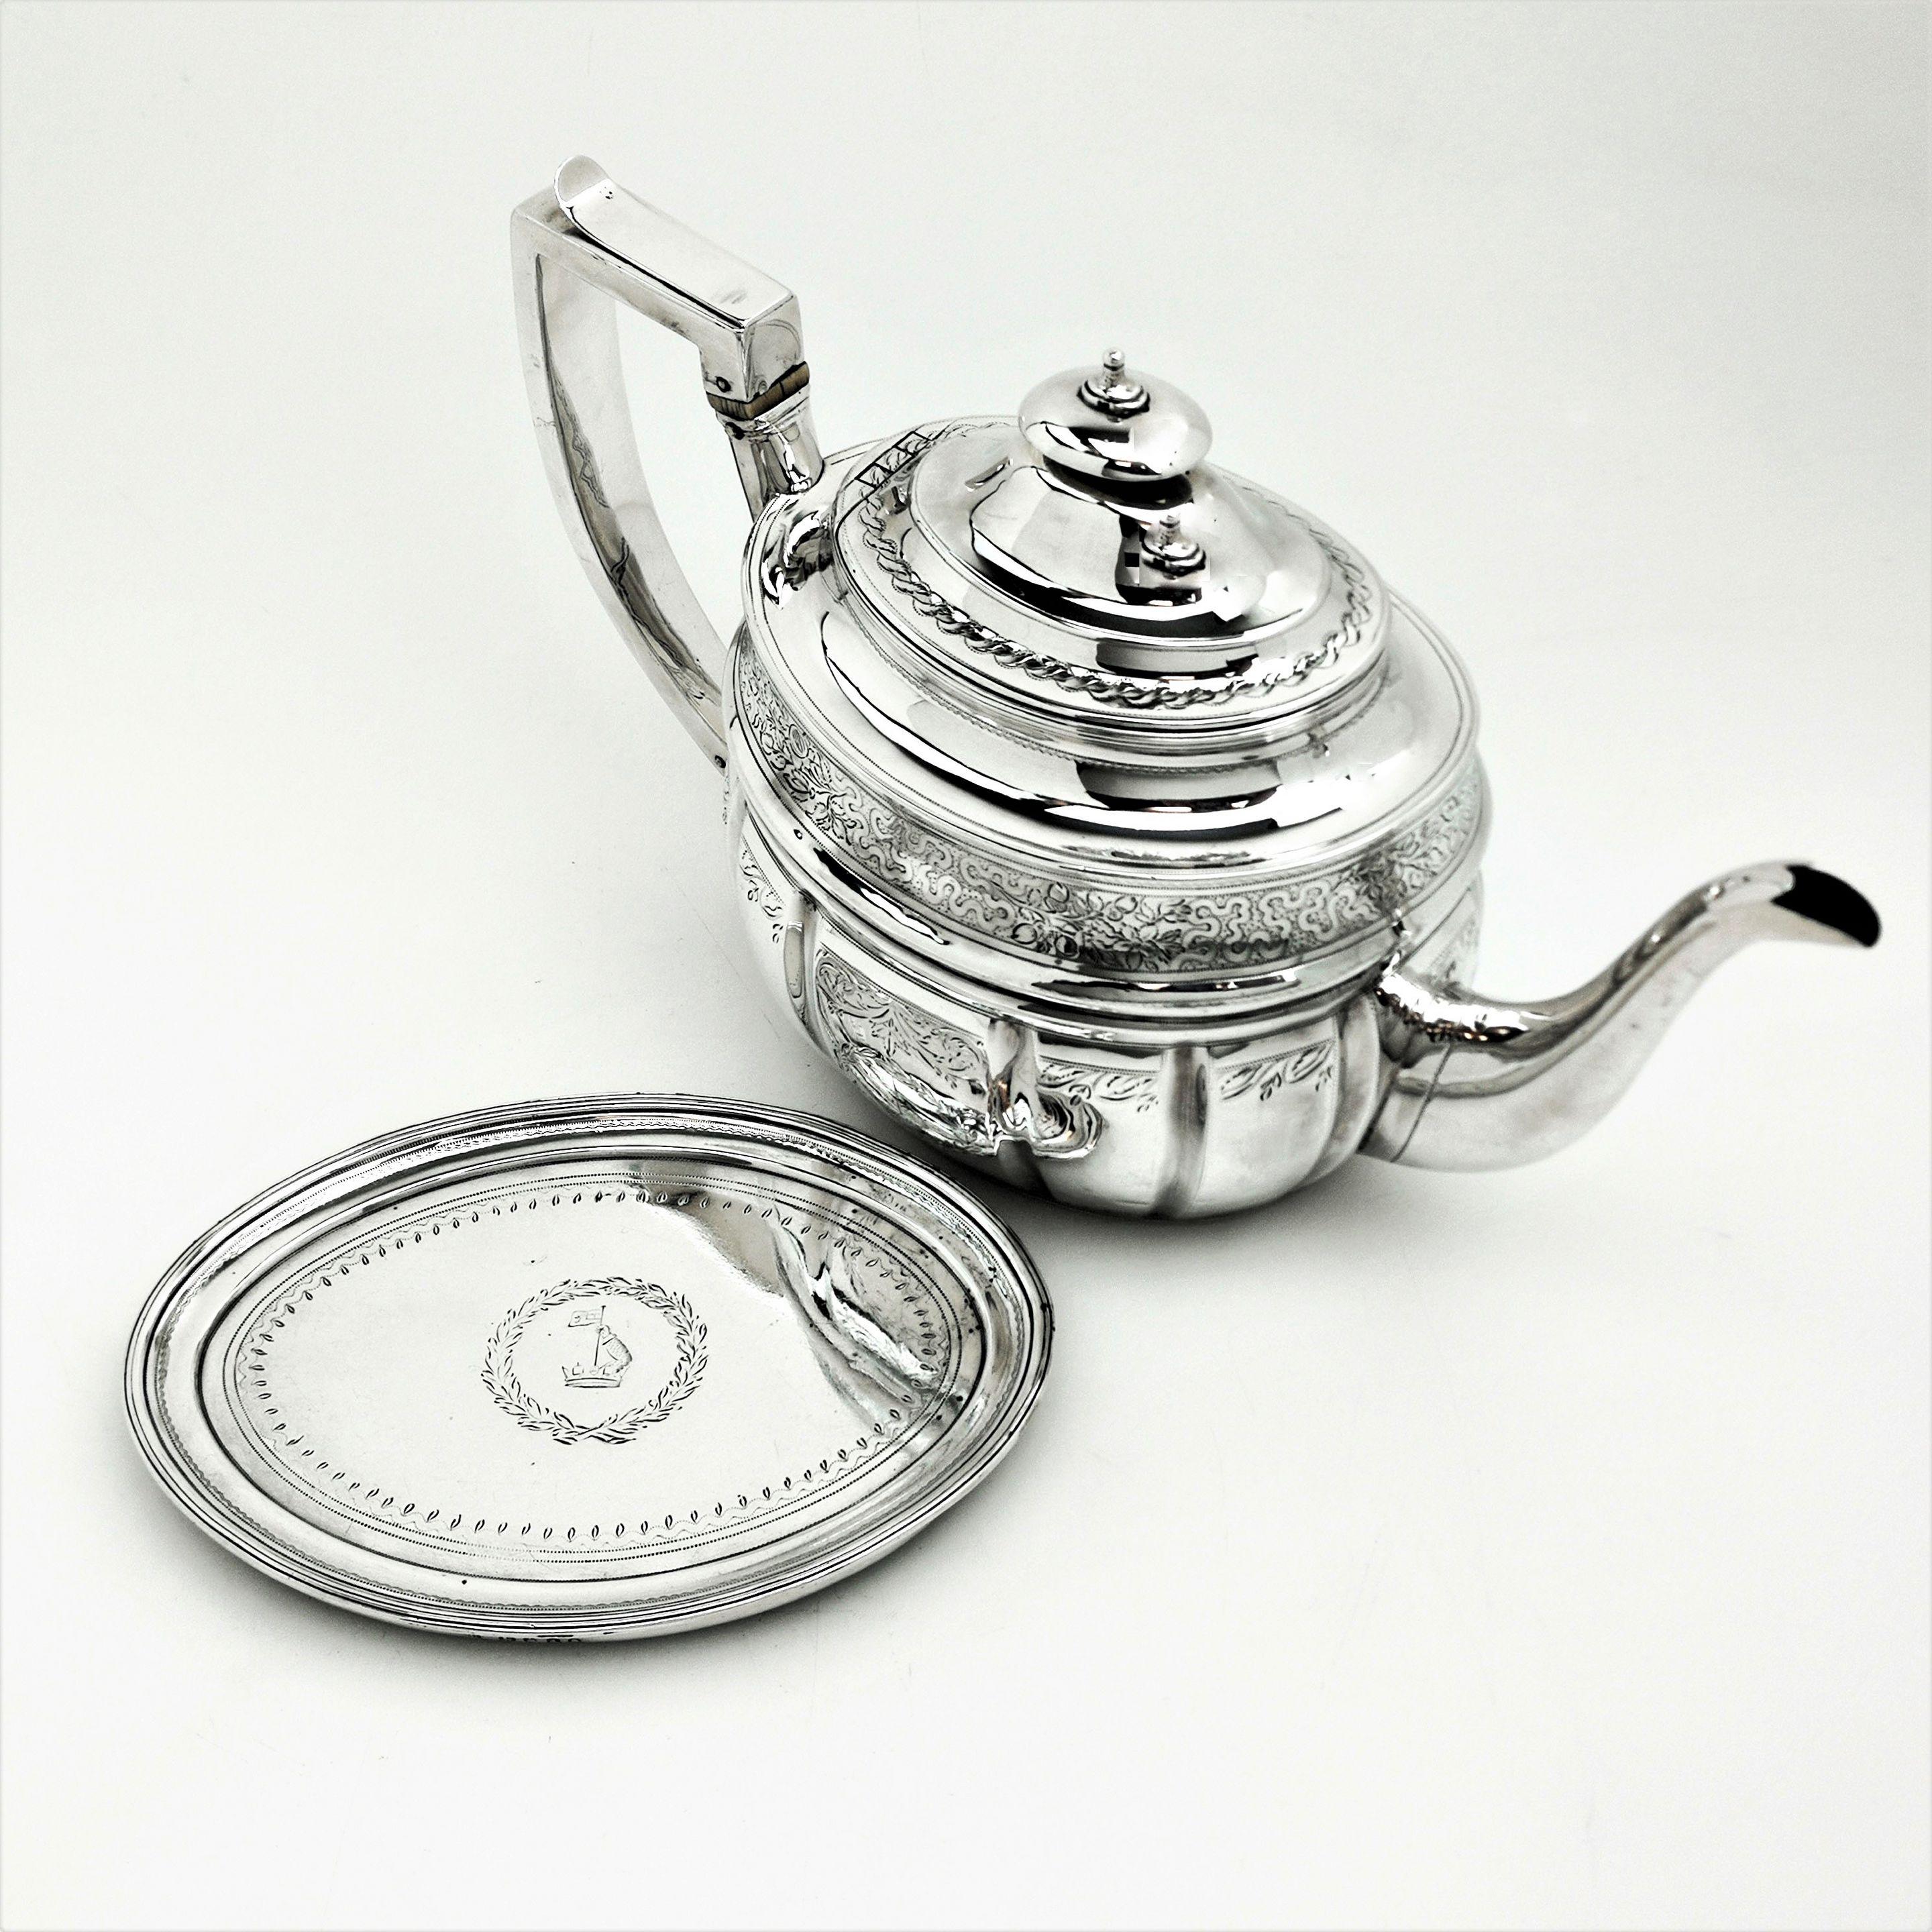 An Antique George III solid Silver Teapot on Stand decorated with a delicate engraved design on the Teapot and on the Oval Tray below. The Teapot and Tray both have matched crests engraved.
 
 Made in London in 1804 by Crespin Fuller.
 
 Approx.